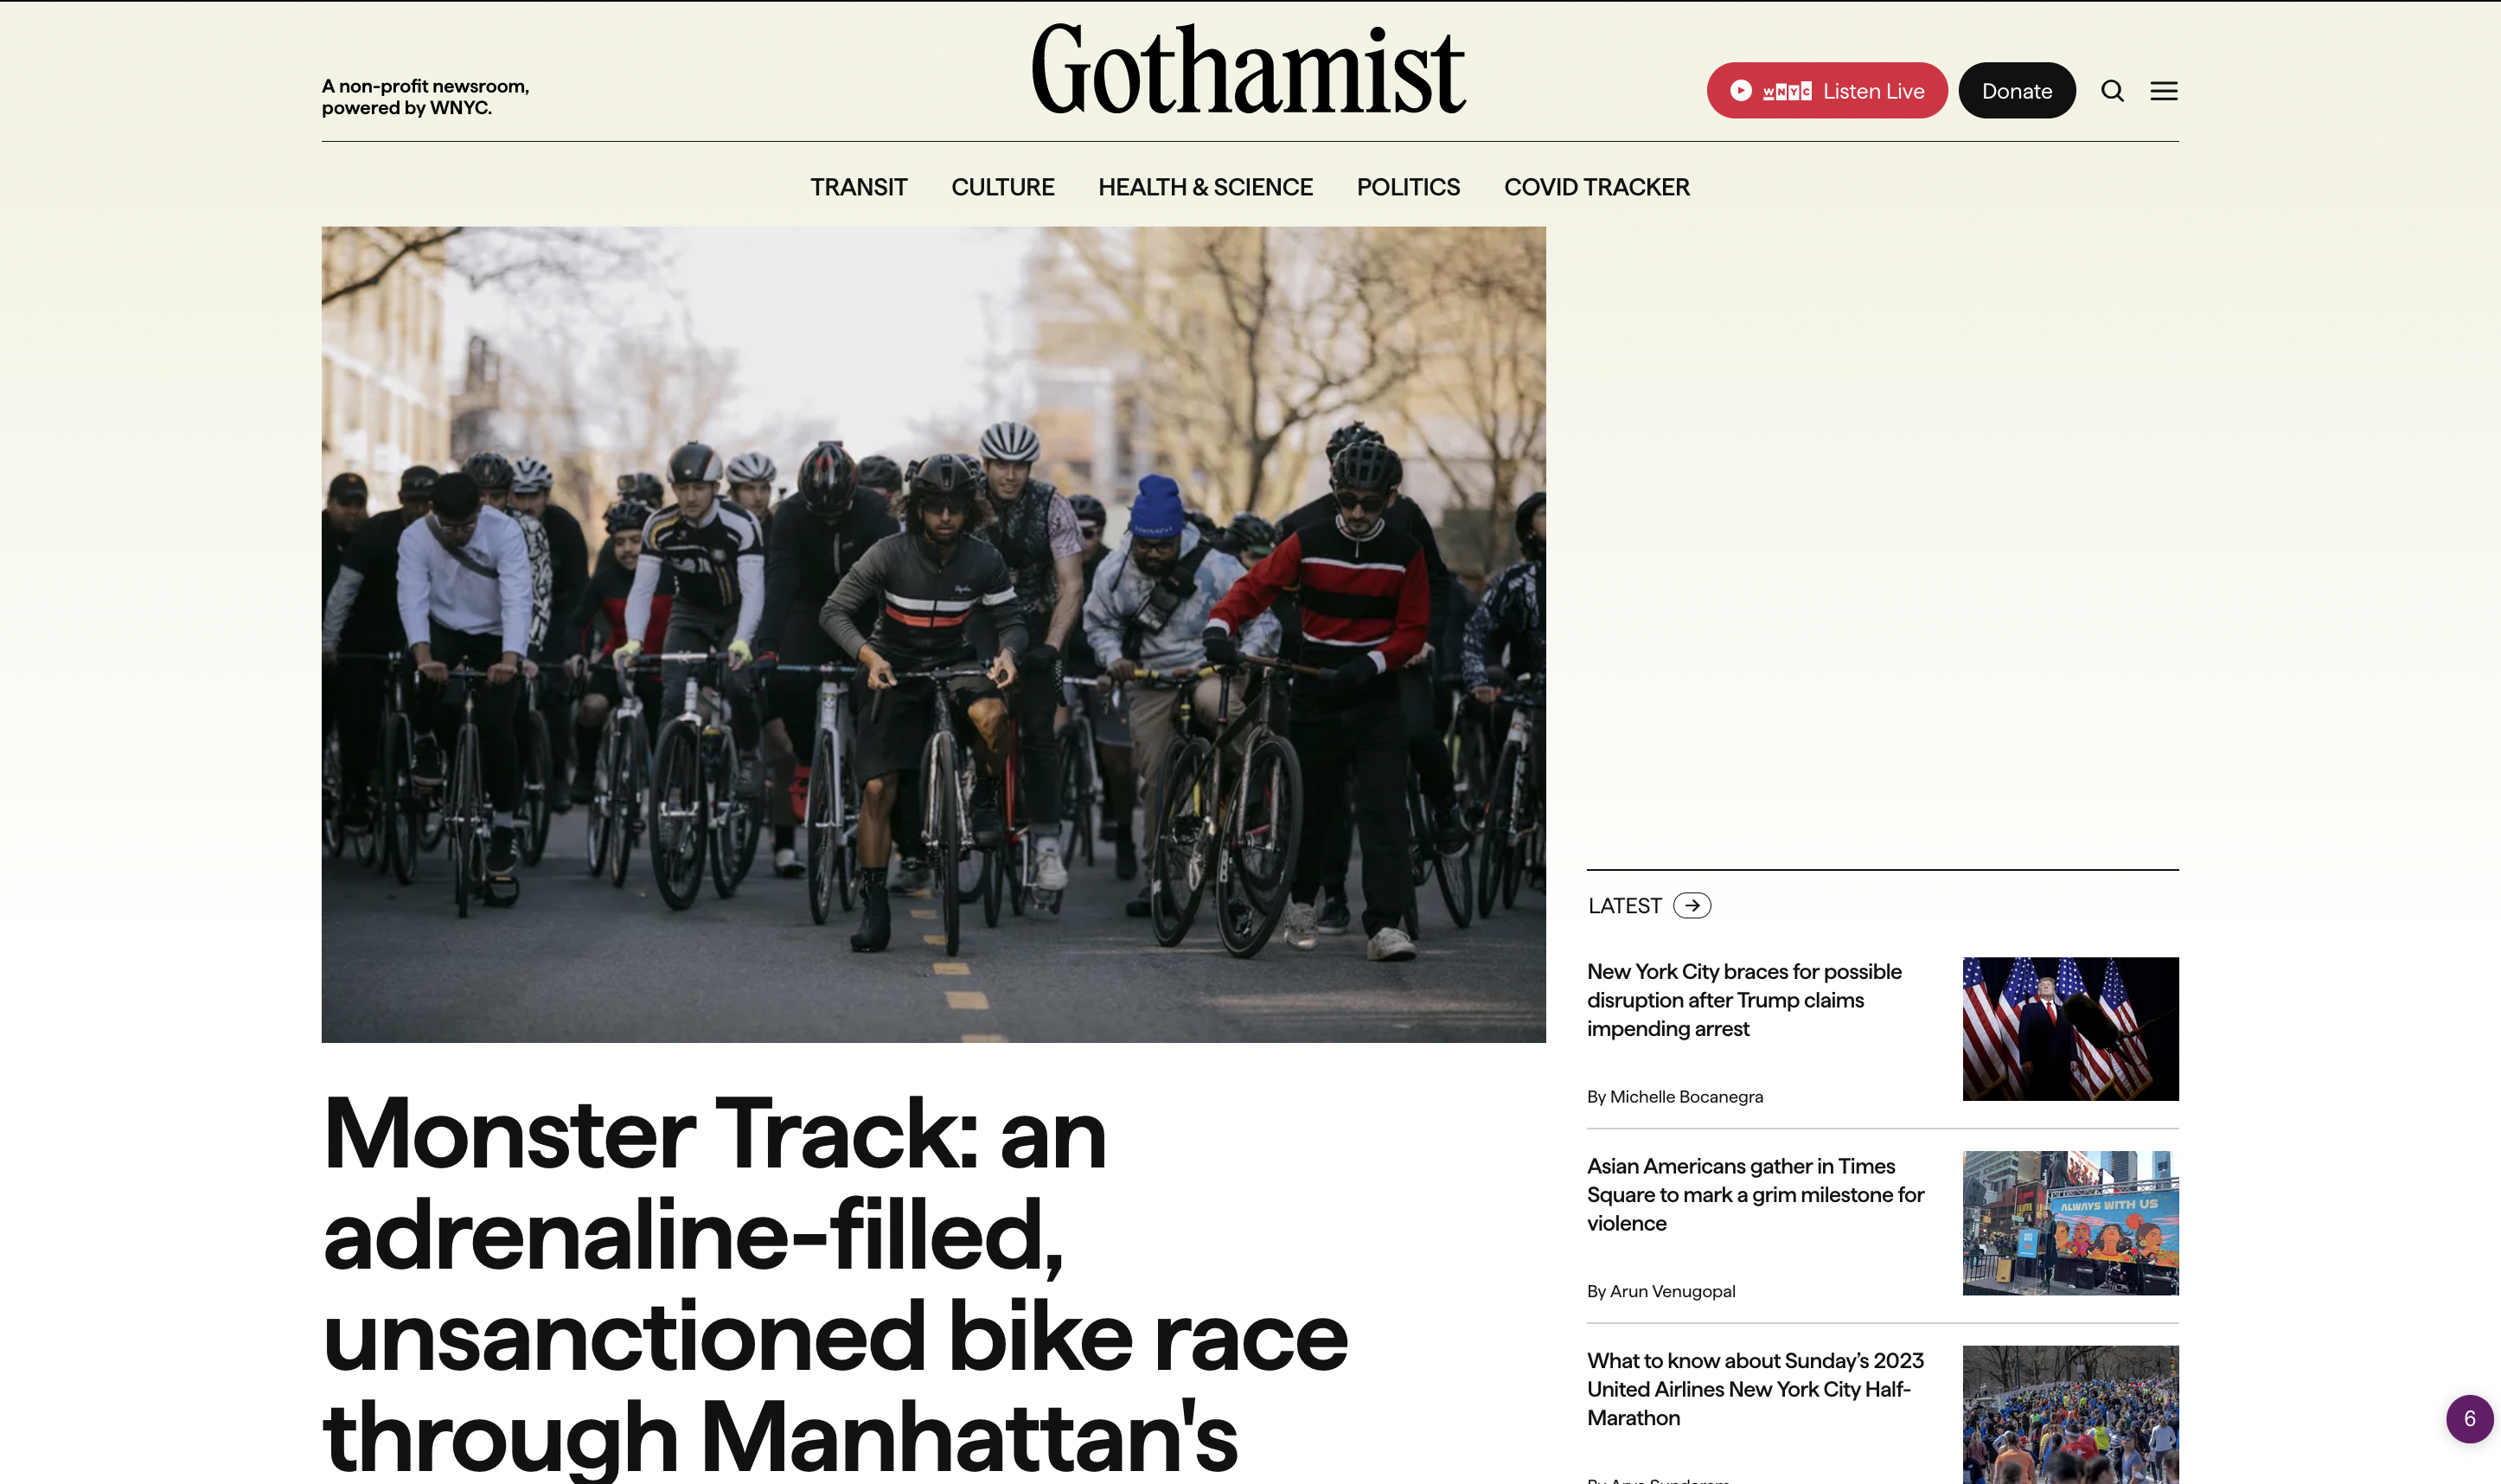 for Gothamist: Monster Track - An adrenaline-filled, unsanctioned bike race through Manhattan's streets